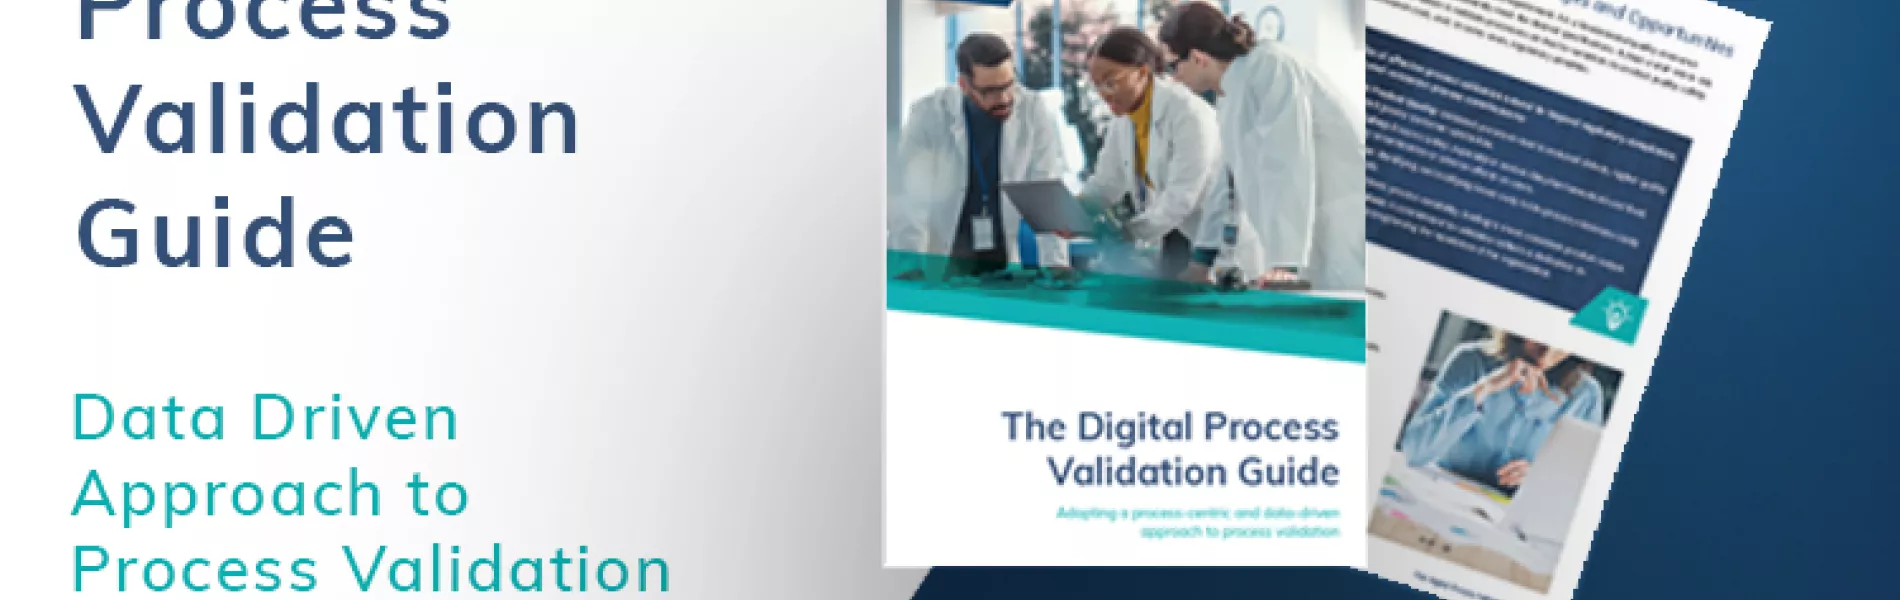 The Complete Guide to Digital Process Validation - Kneat